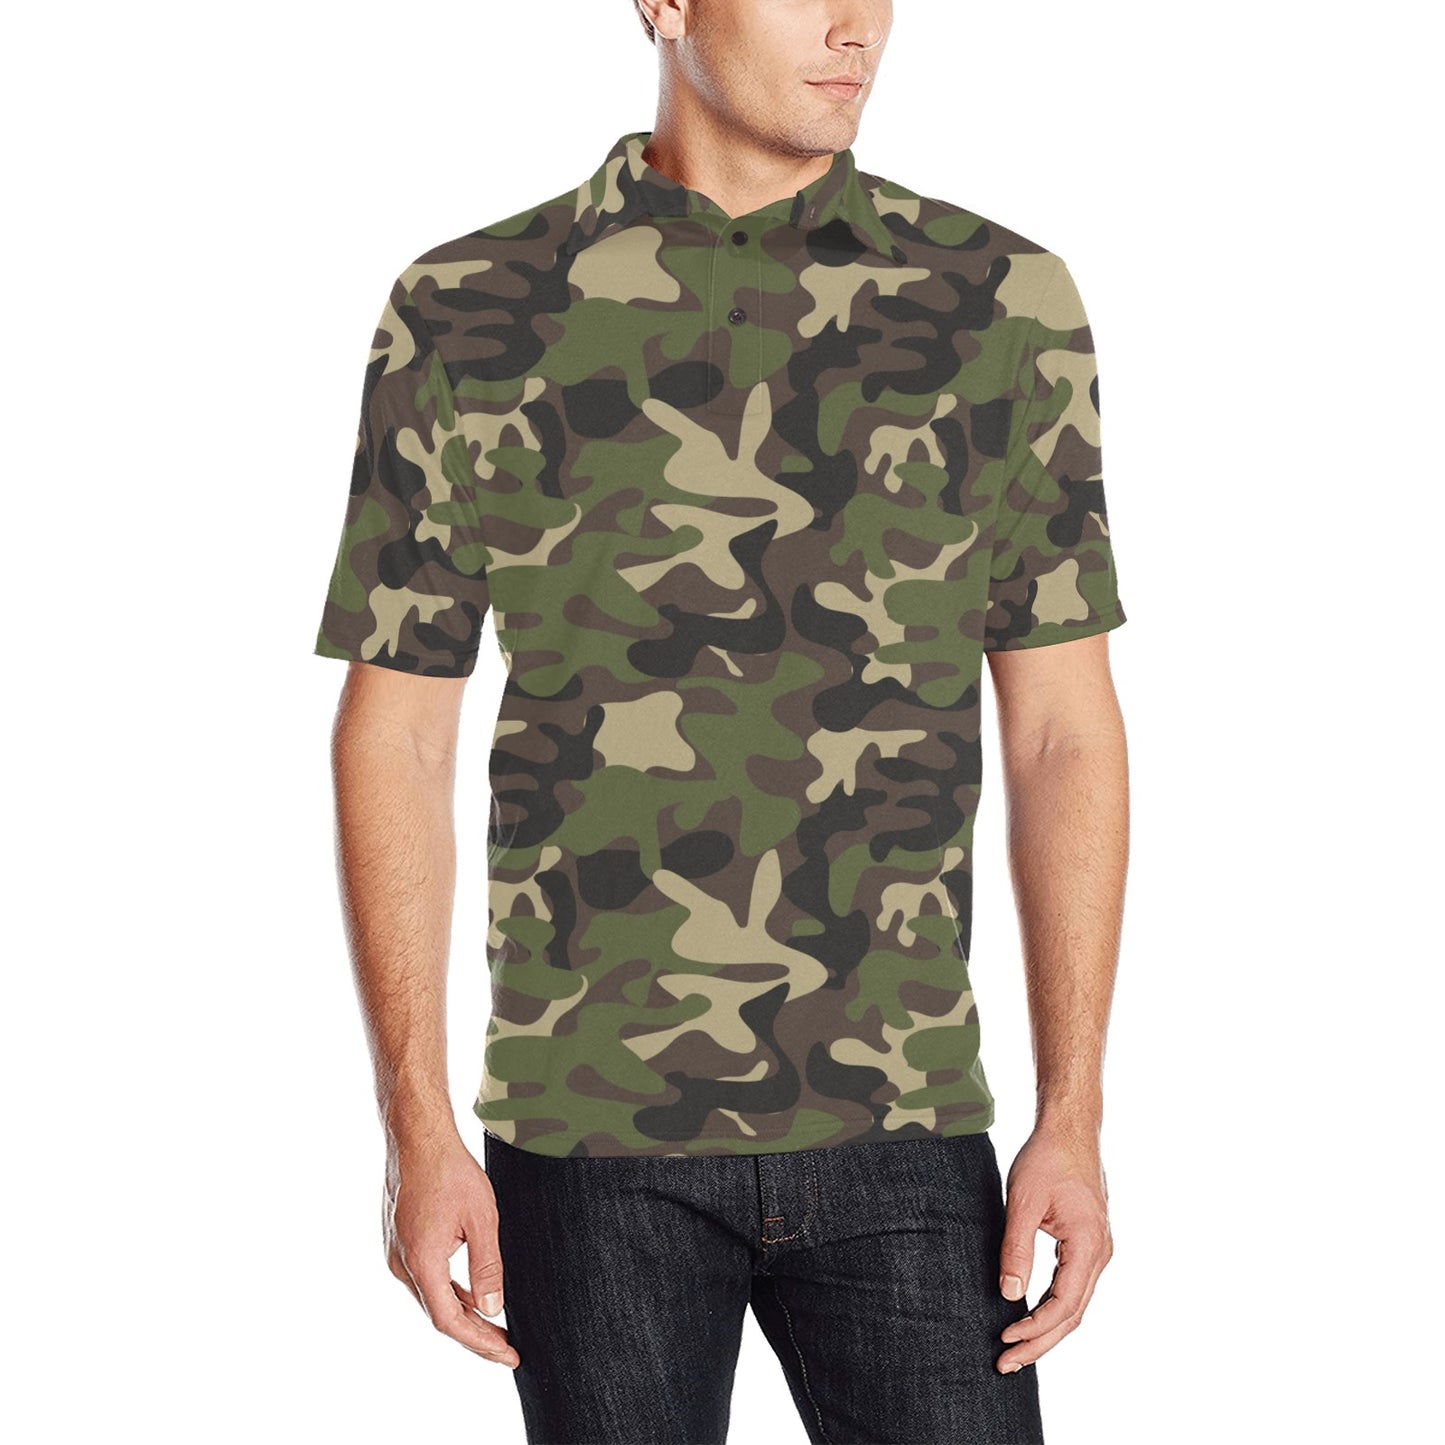 Camouflage Men Polo Collared Shirt, Camo Green Army Pattern Casual Summer Buttoned Down Up Shirt Short Sleeve Sports Golf Tee